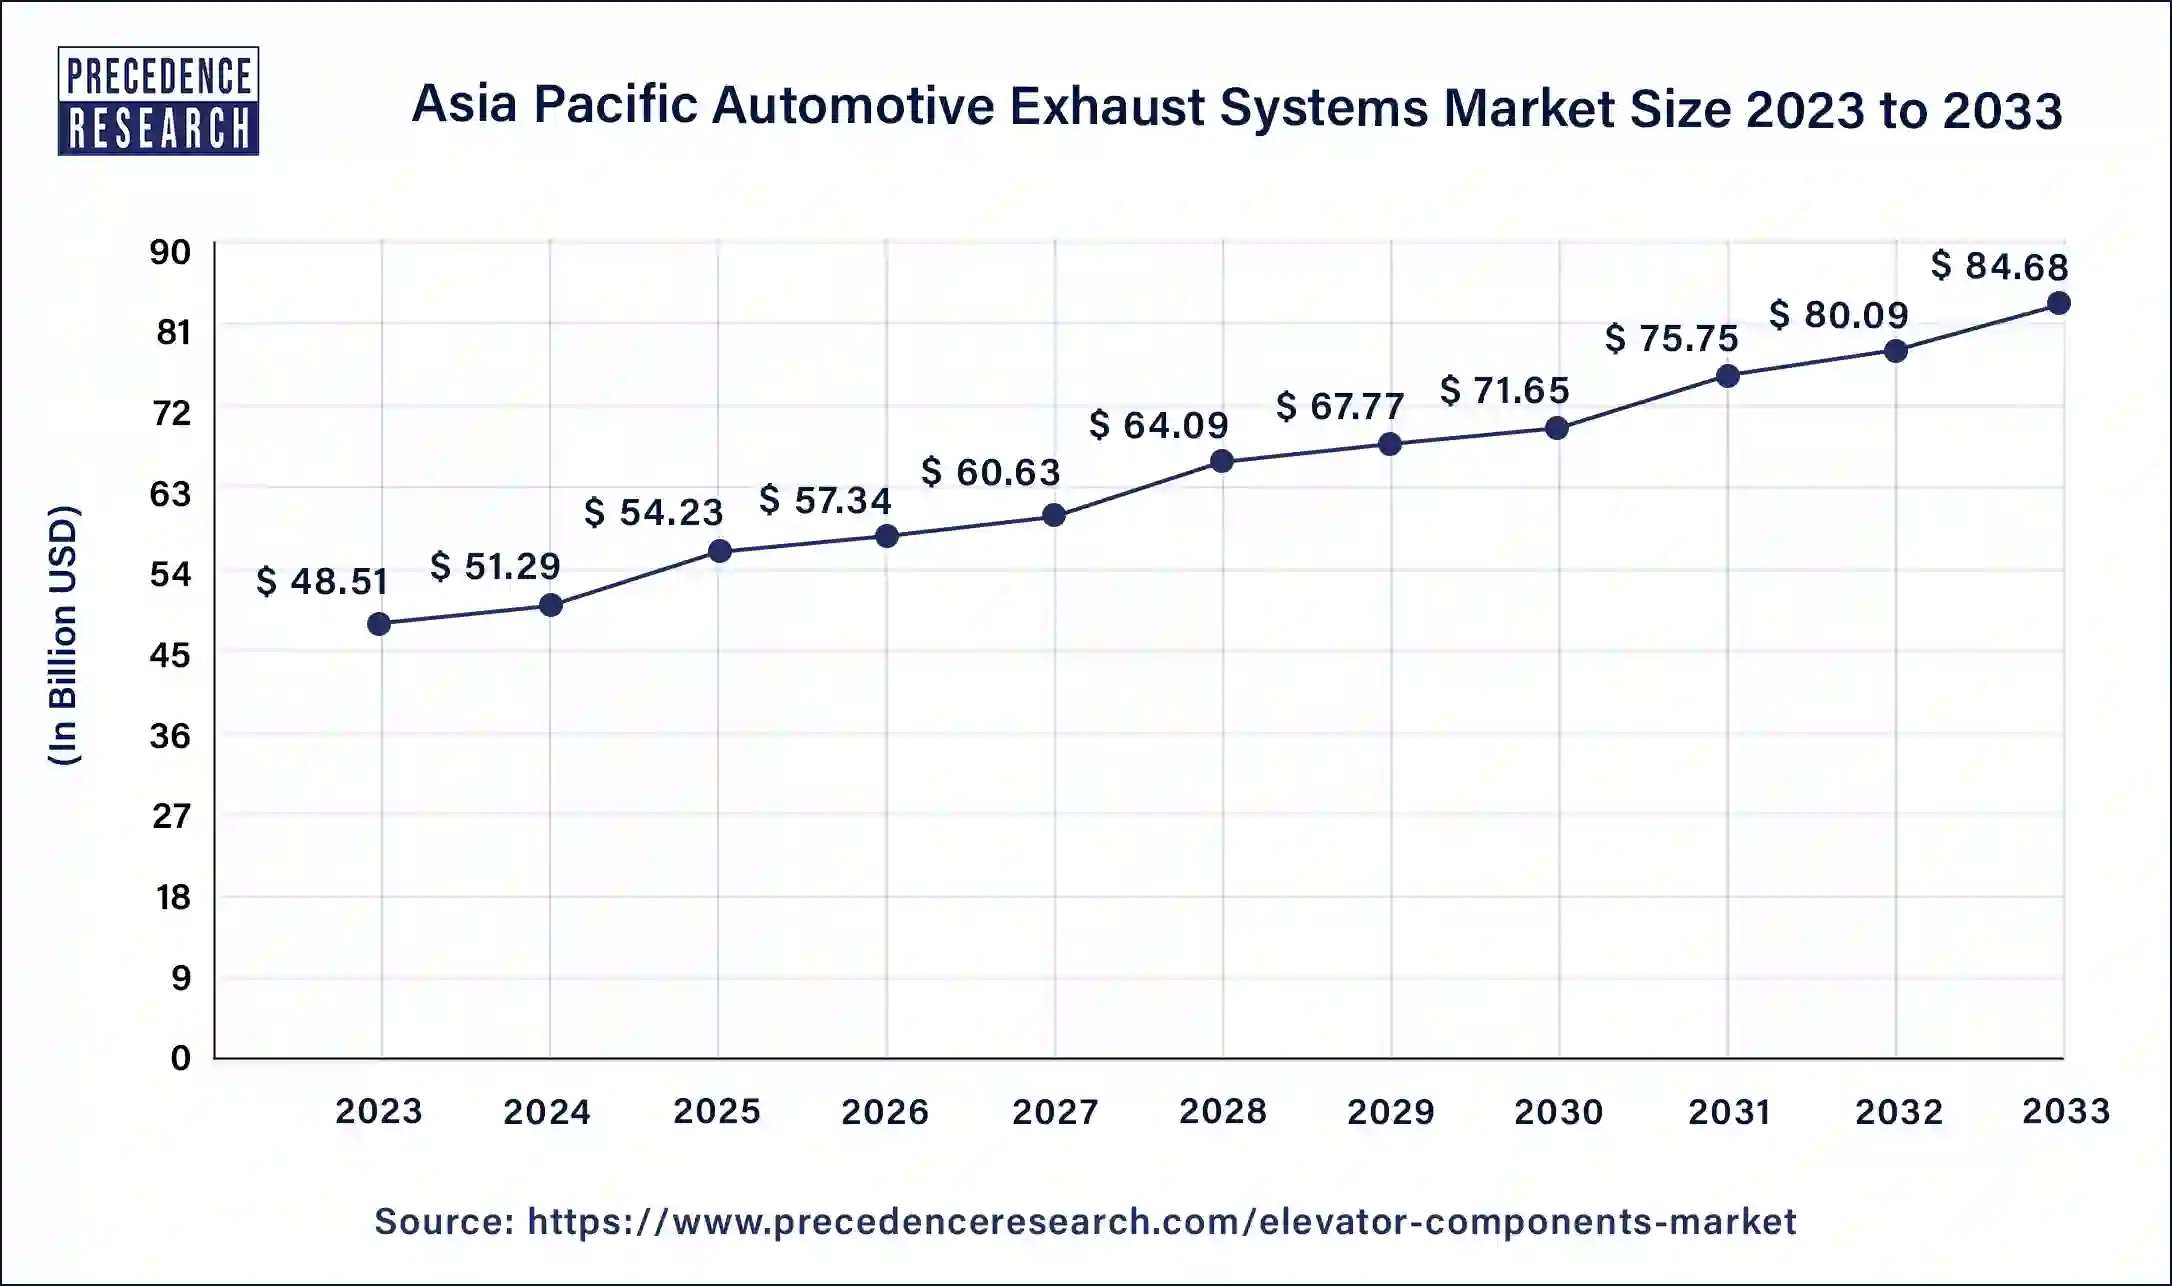 Asia Pacific Automotive Exhaust Systems Market Size 2024 to 2033